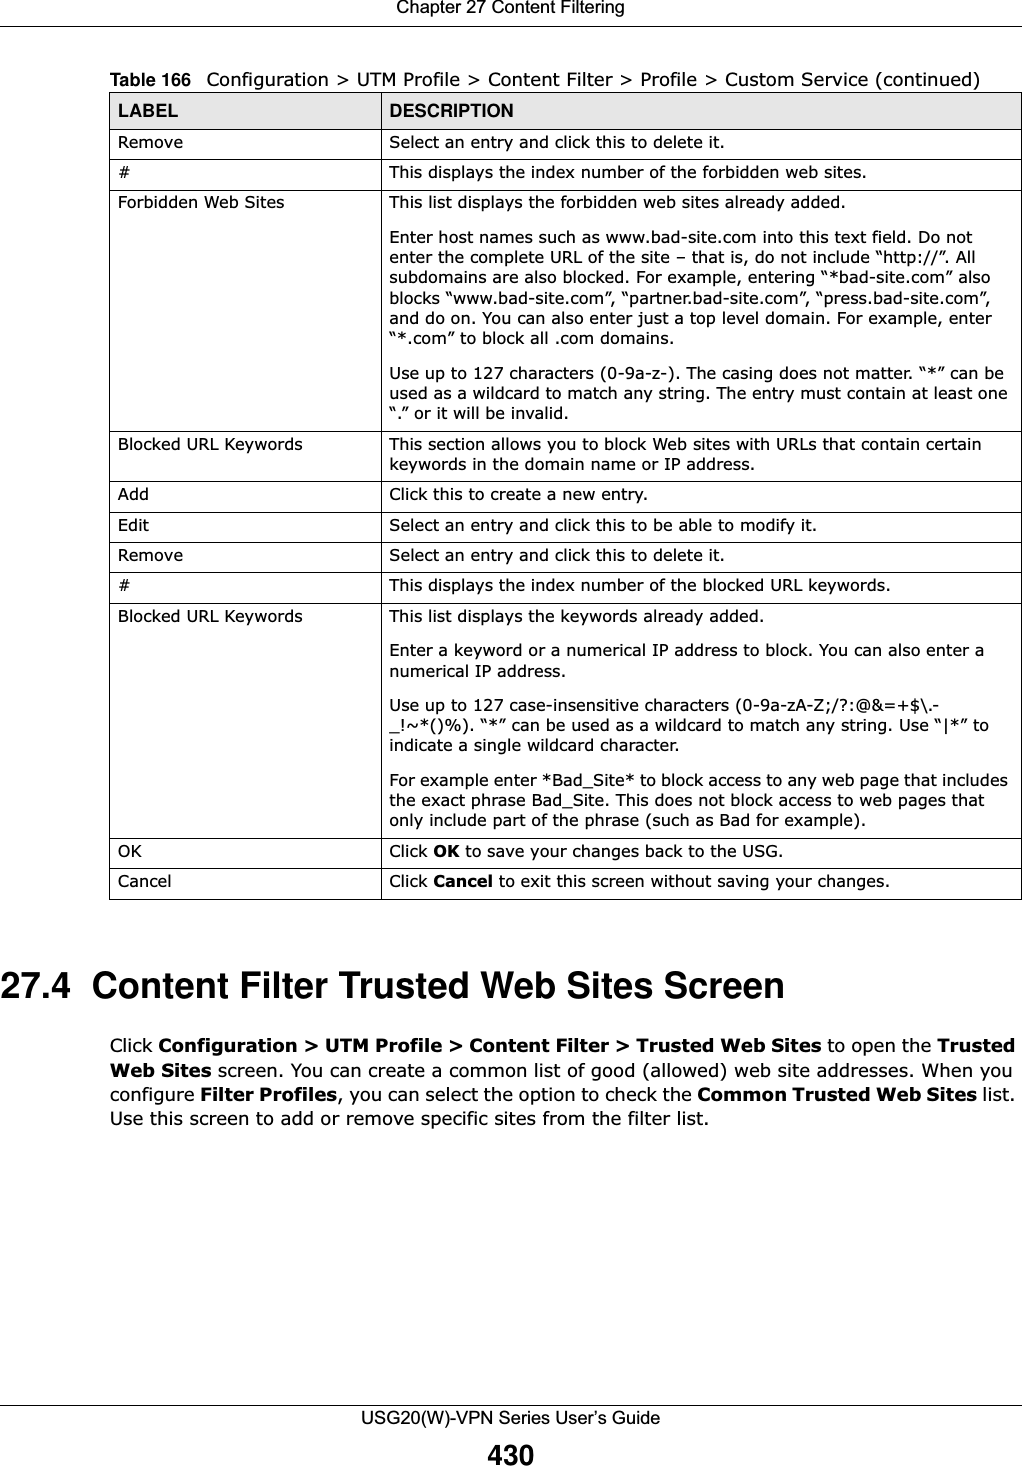 Chapter 27 Content FilteringUSG20(W)-VPN Series User’s Guide43027.4  Content Filter Trusted Web Sites Screen Click Configuration &gt; UTM Profile &gt; Content Filter &gt; Trusted Web Sites to open the TrustedWeb Sites screen. You can create a common list of good (allowed) web site addresses. When you configure Filter Profiles, you can select the option to check the Common Trusted Web Sites list. Use this screen to add or remove specific sites from the filter list. Remove Select an entry and click this to delete it. # This displays the index number of the forbidden web sites.Forbidden Web Sites This list displays the forbidden web sites already added.Enter host names such as www.bad-site.com into this text field. Do not enter the complete URL of the site – that is, do not include “http://”. All subdomains are also blocked. For example, entering “*bad-site.com” also blocks “www.bad-site.com”, “partner.bad-site.com”, “press.bad-site.com”, and do on. You can also enter just a top level domain. For example, enter “*.com” to block all .com domains. Use up to 127 characters (0-9a-z-). The casing does not matter. “*” can be used as a wildcard to match any string. The entry must contain at least one “.” or it will be invalid.Blocked URL Keywords This section allows you to block Web sites with URLs that contain certain keywords in the domain name or IP address. Add Click this to create a new entry. Edit Select an entry and click this to be able to modify it. Remove Select an entry and click this to delete it. # This displays the index number of the blocked URL keywords.Blocked URL Keywords This list displays the keywords already added. Enter a keyword or a numerical IP address to block. You can also enter a numerical IP address.Use up to 127 case-insensitive characters (0-9a-zA-Z;/?:@&amp;=+$\.-_!~*()%). “*” can be used as a wildcard to match any string. Use “|*” to indicate a single wildcard character.For example enter *Bad_Site* to block access to any web page that includes the exact phrase Bad_Site. This does not block access to web pages that only include part of the phrase (such as Bad for example). OK Click OK to save your changes back to the USG.Cancel Click Cancel to exit this screen without saving your changes.Table 166   Configuration &gt; UTM Profile &gt; Content Filter &gt; Profile &gt; Custom Service (continued)LABEL DESCRIPTION